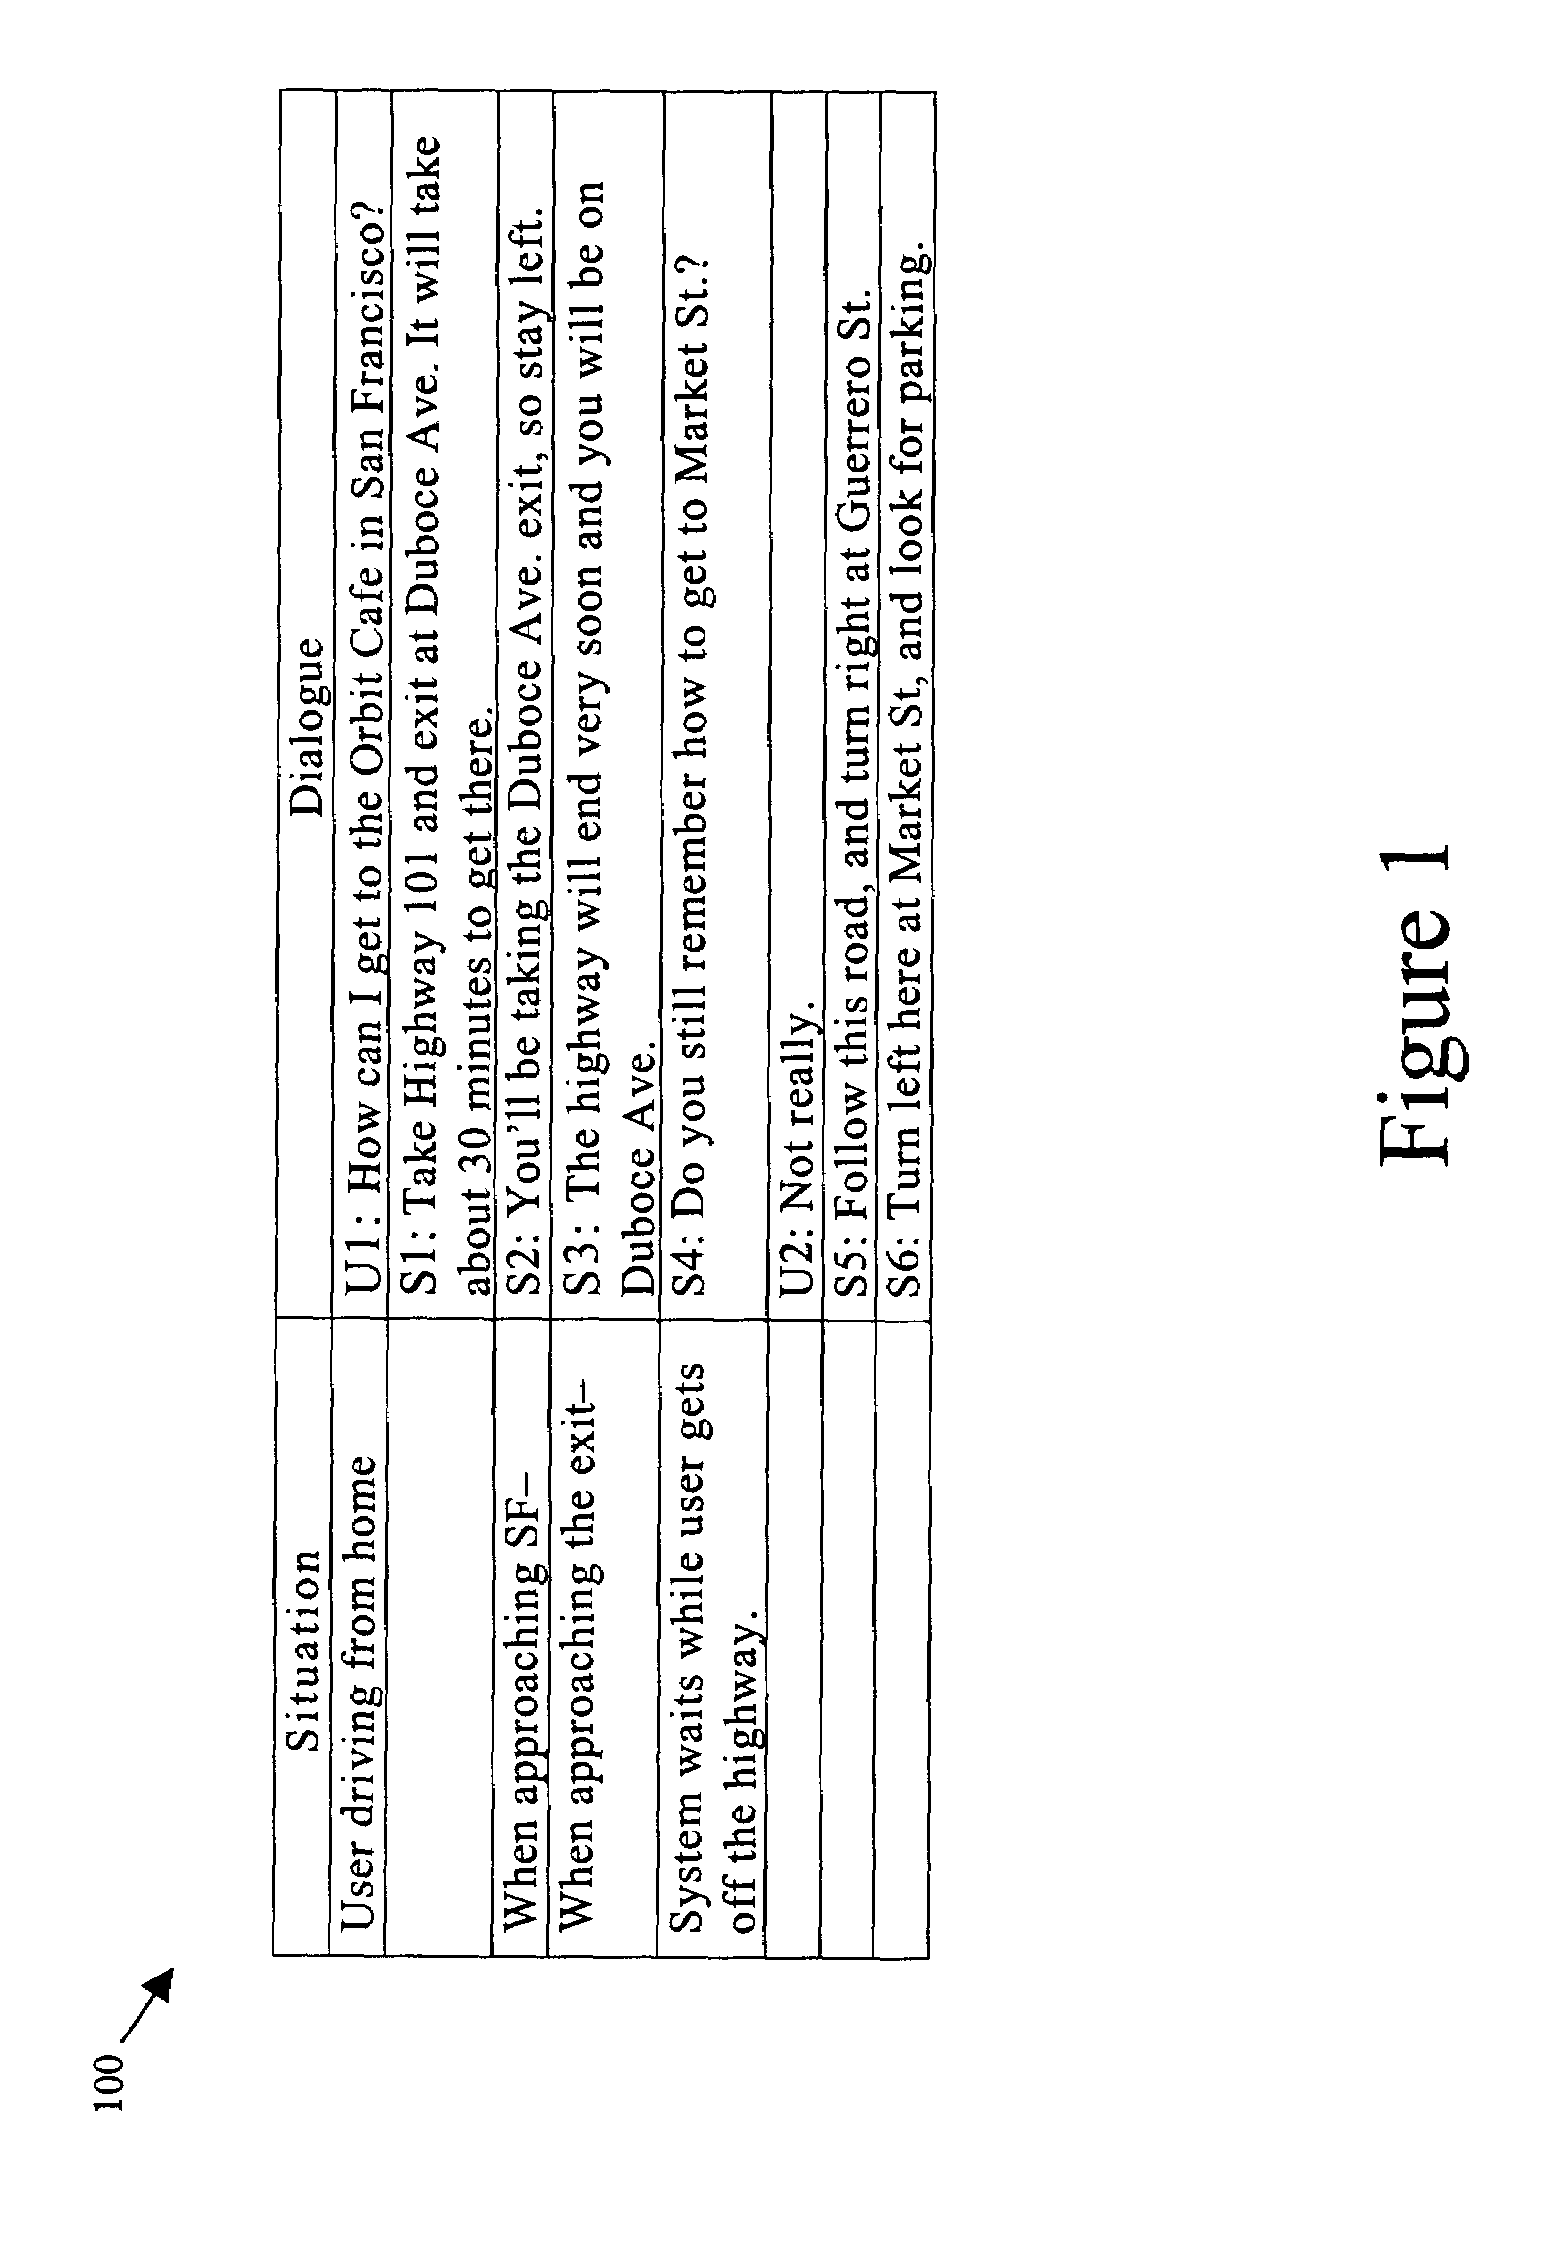 Method and system for adaptive navigation using a driver's route knowledge